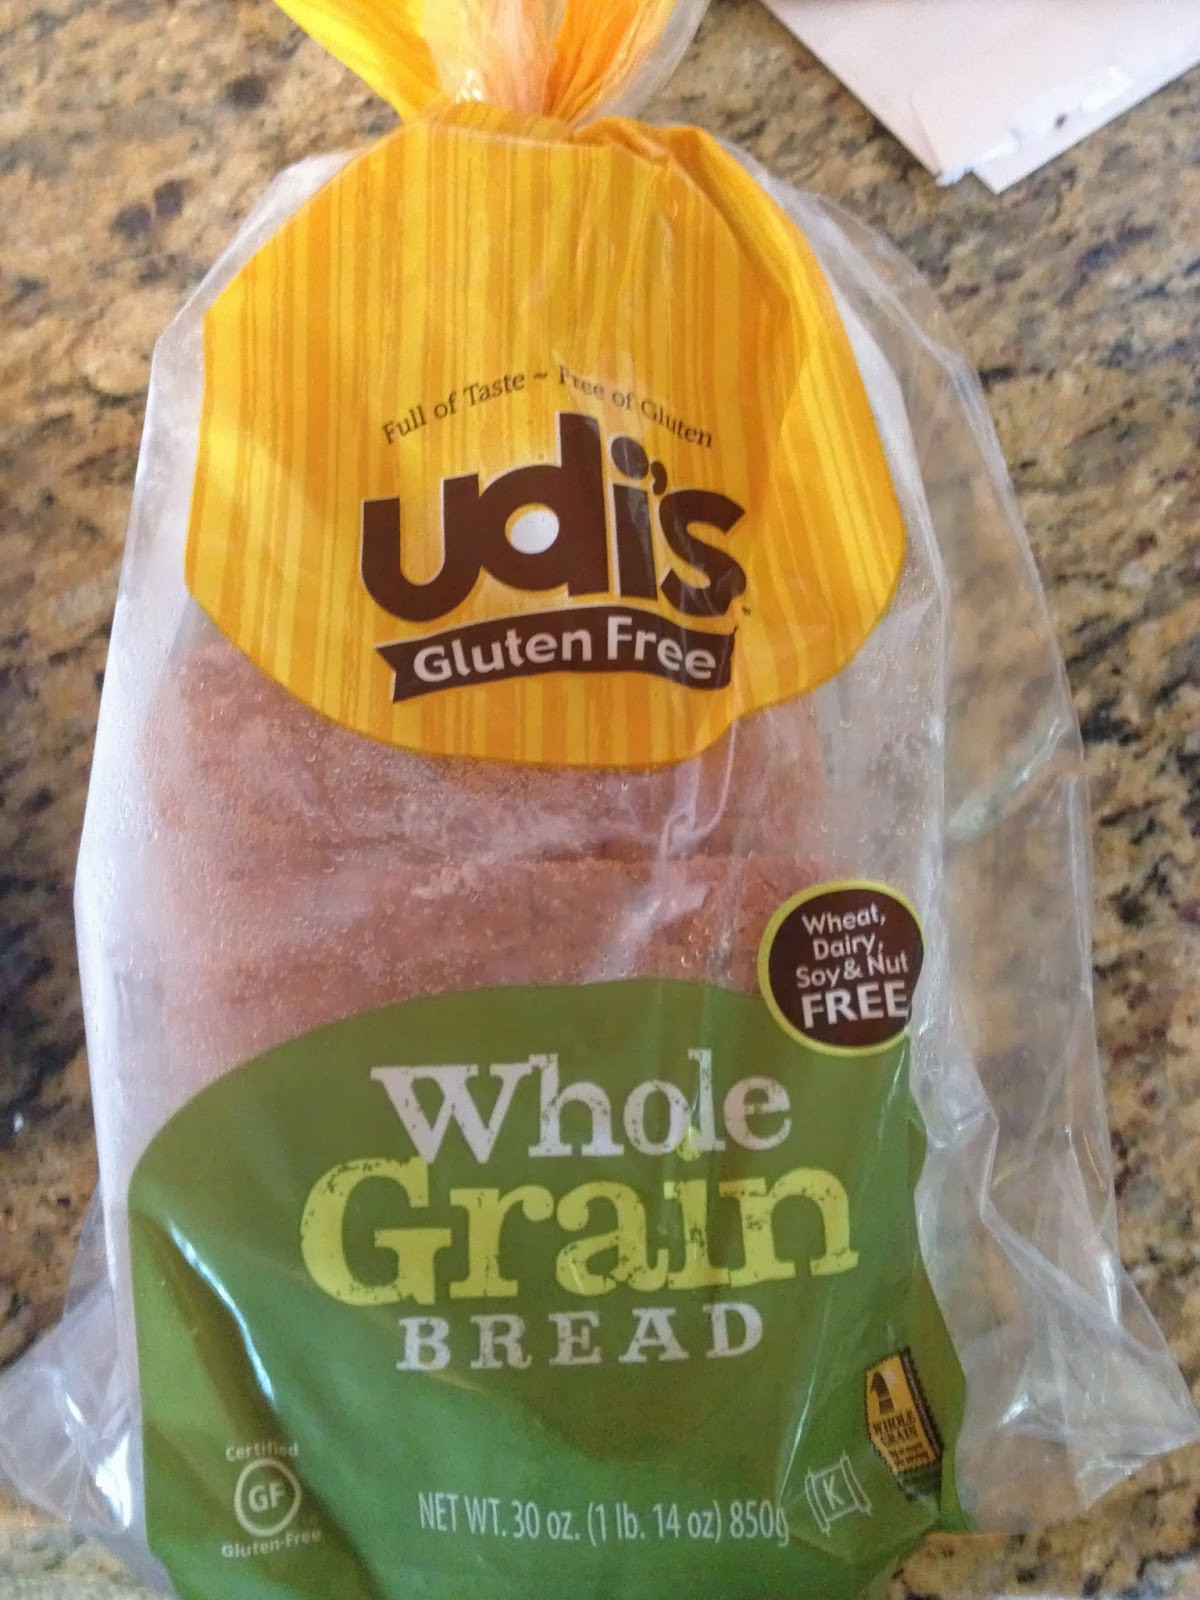 Udis Gluten Free Bread
 ADHD Eating No Wheat Dairy or Soy of any kind Udi s